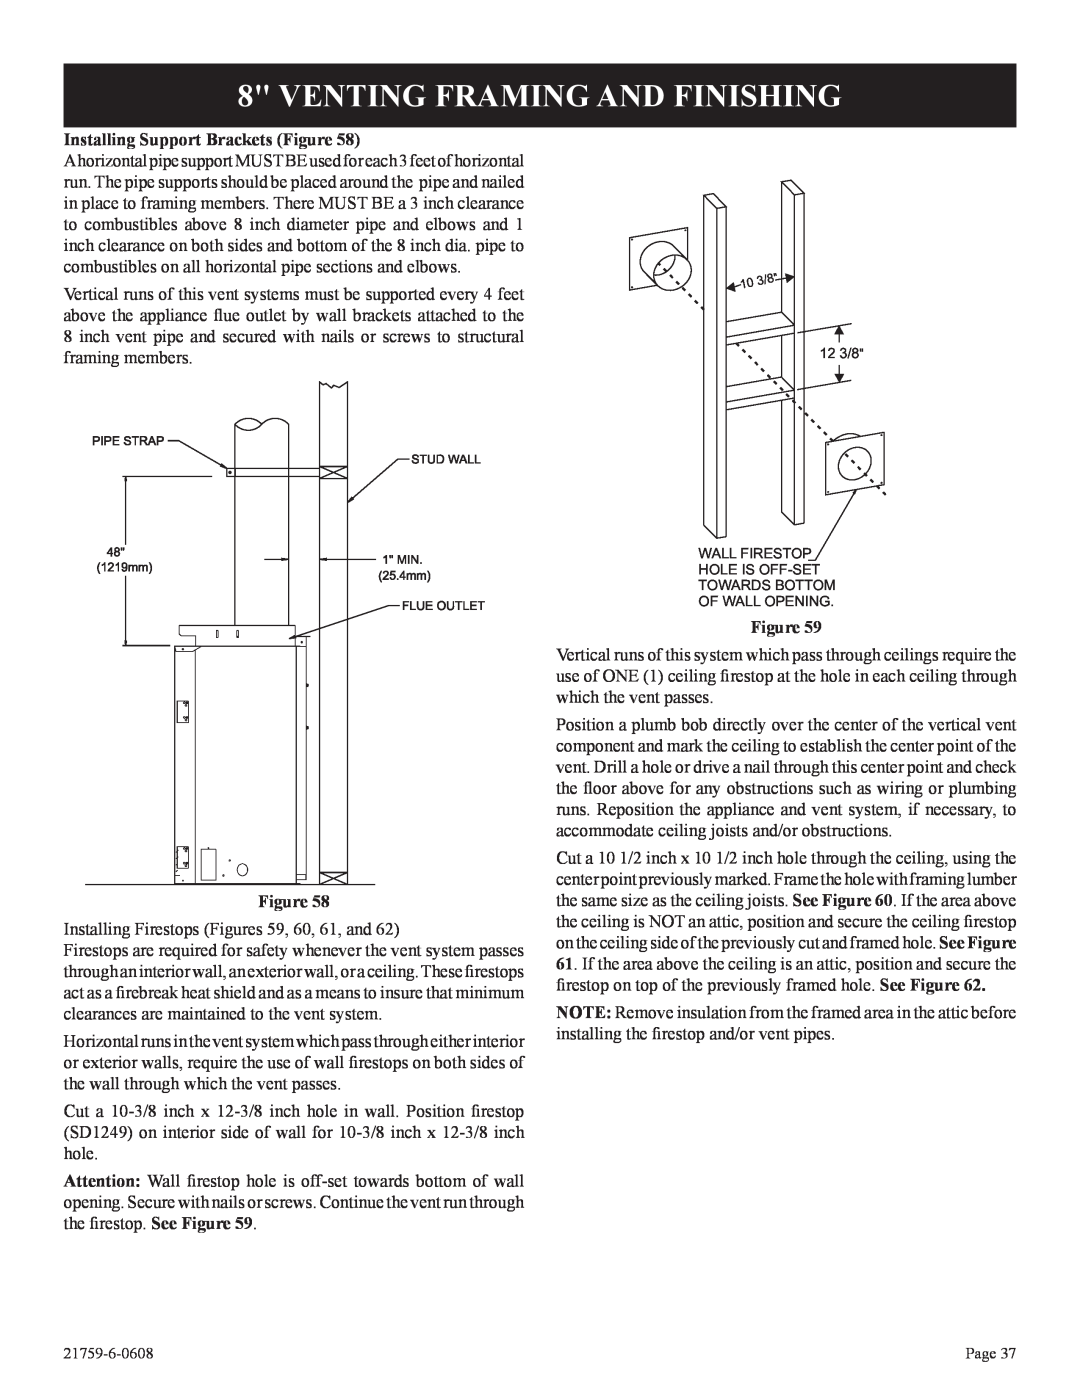 Empire Comfort Systems DVP42FP, P)-2 Venting Framing And Finishing, Installing Support Brackets Figure 